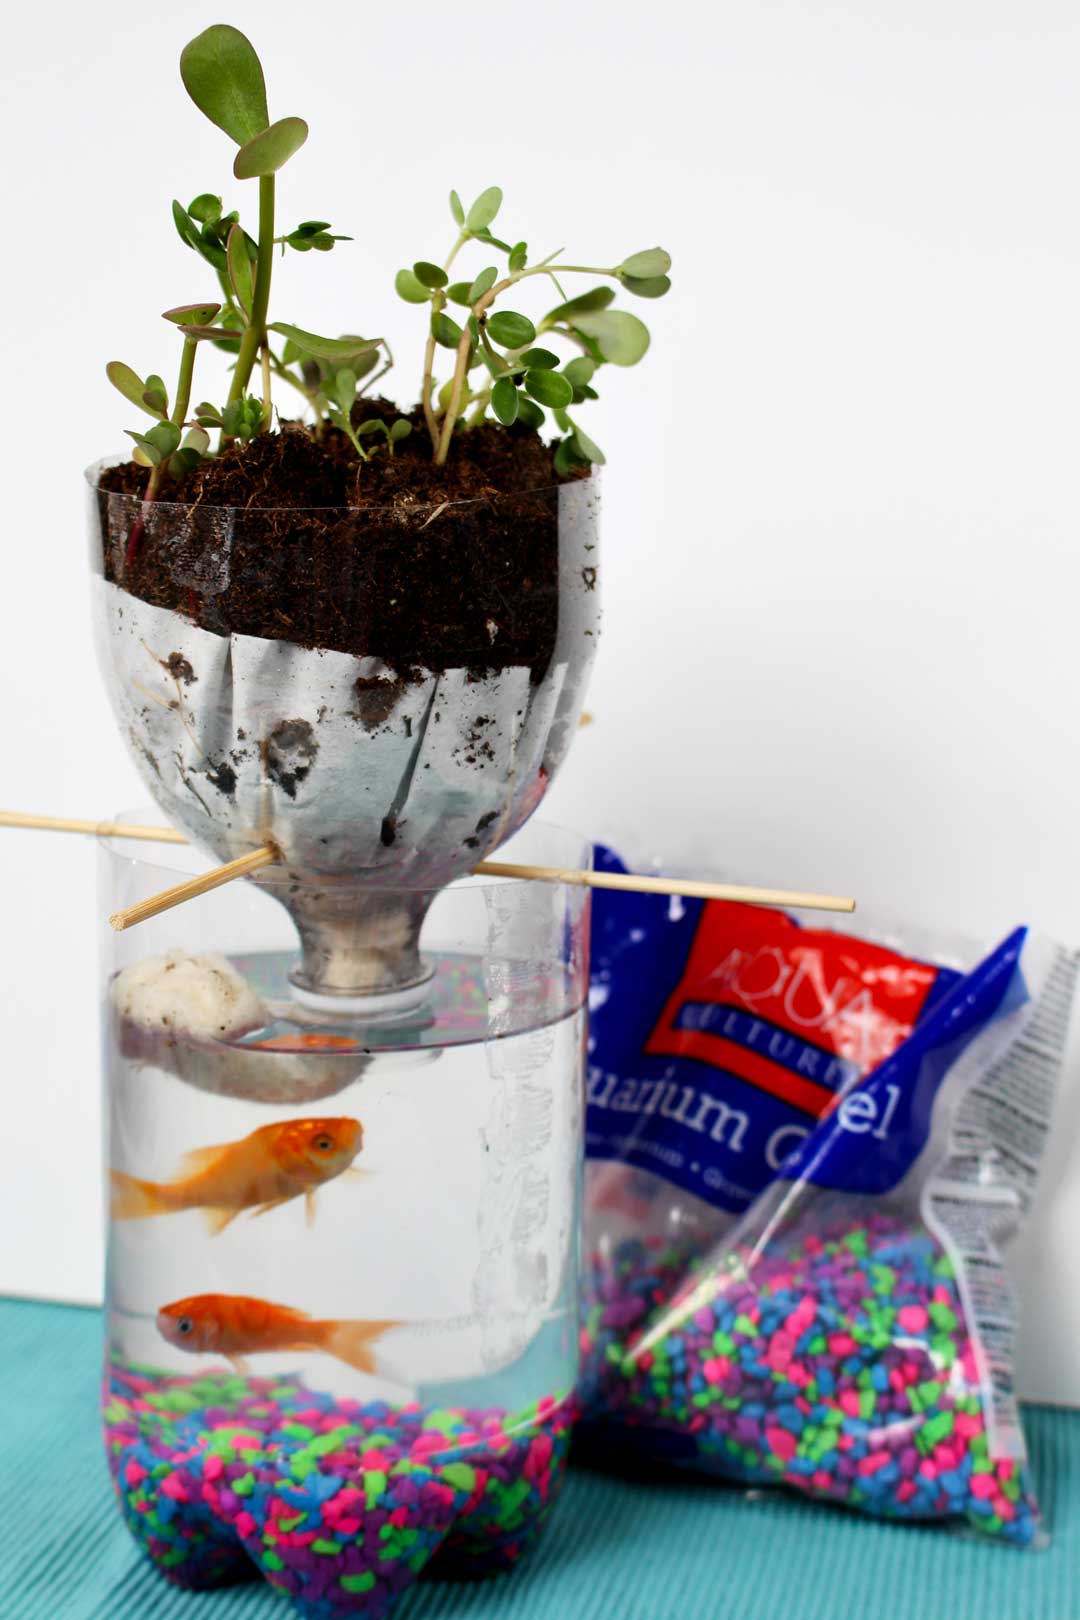 2-Liter Bottle Ecosystem Project with two goldfish and a plant.